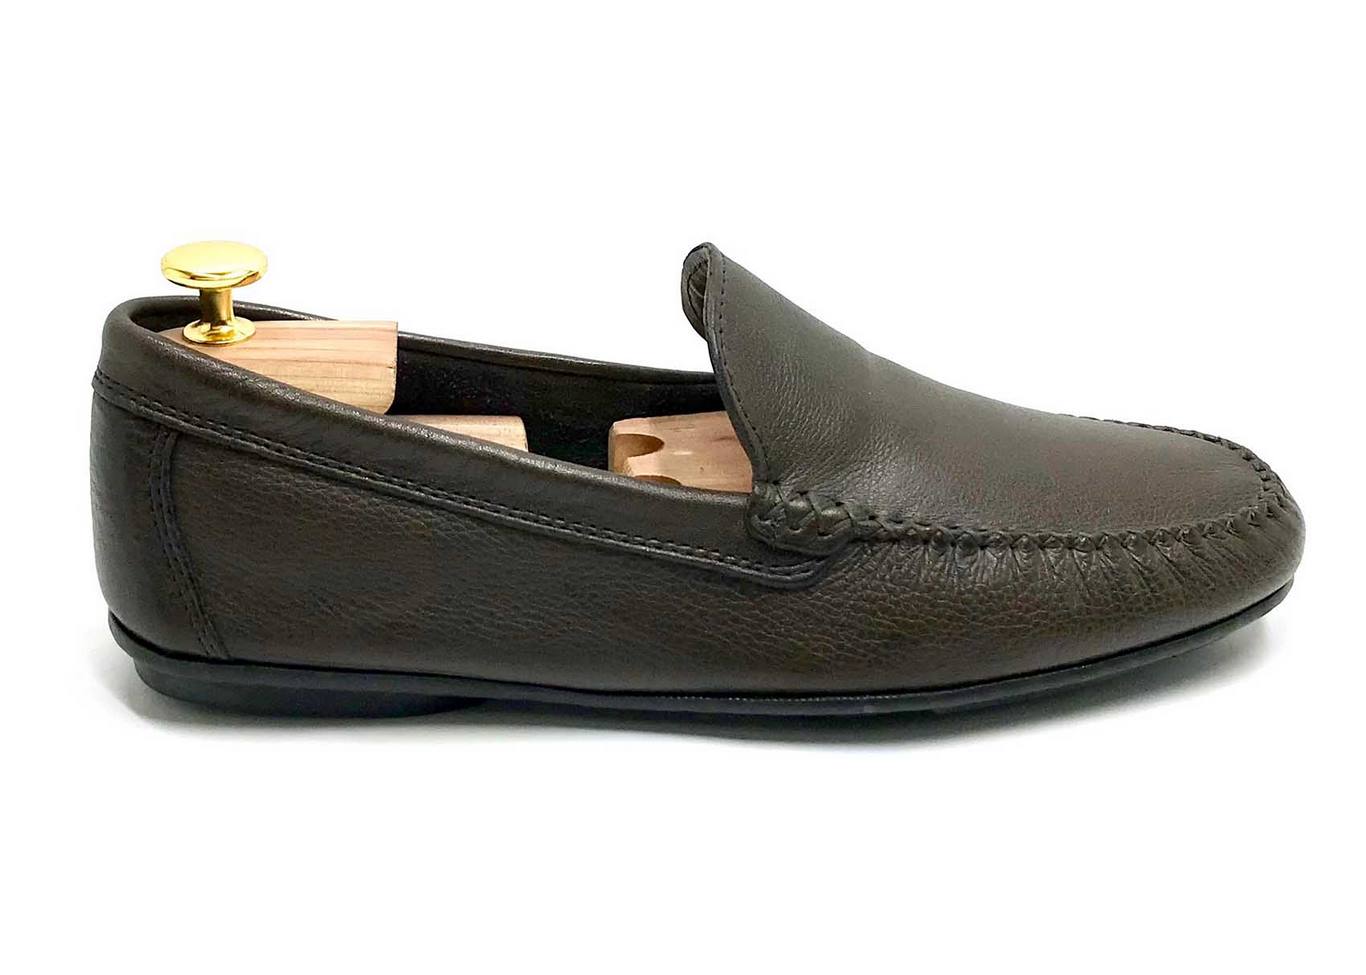 Comfort Loafer with rubber Bottom in dark Brown hammered leather